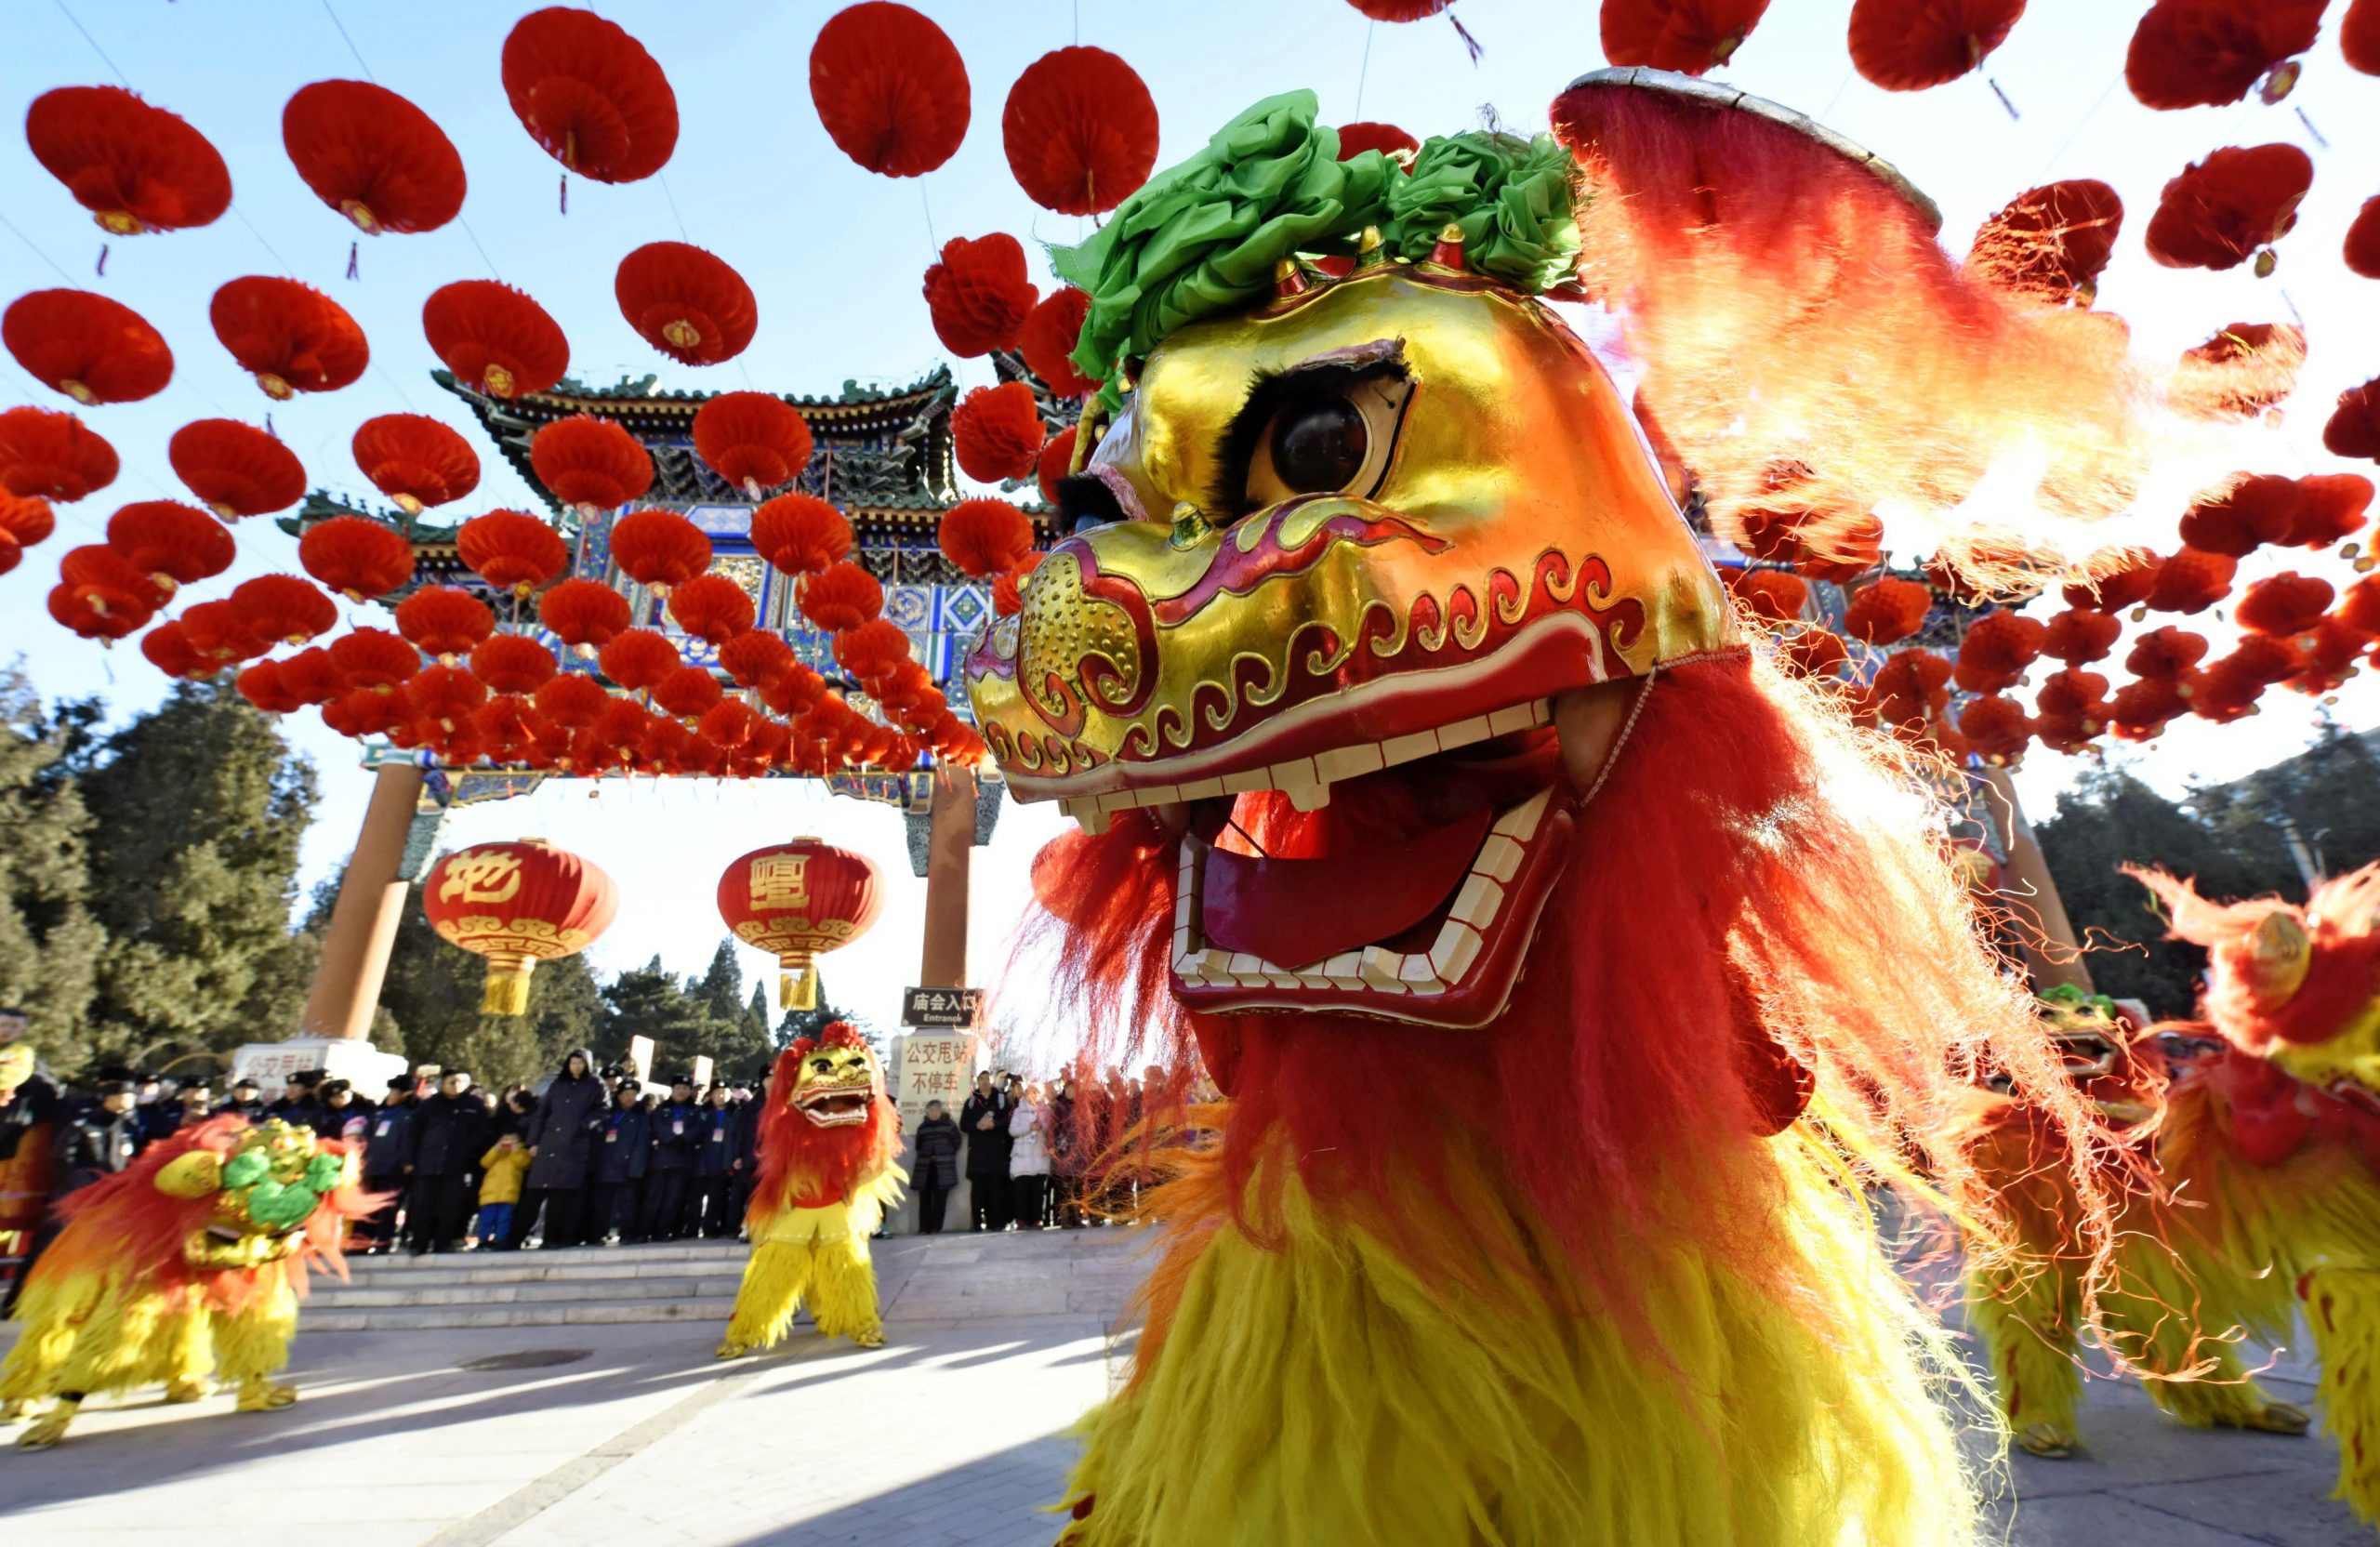 China's consumers shelled out for goods and experiences this Lunar New Year. © Kyodo